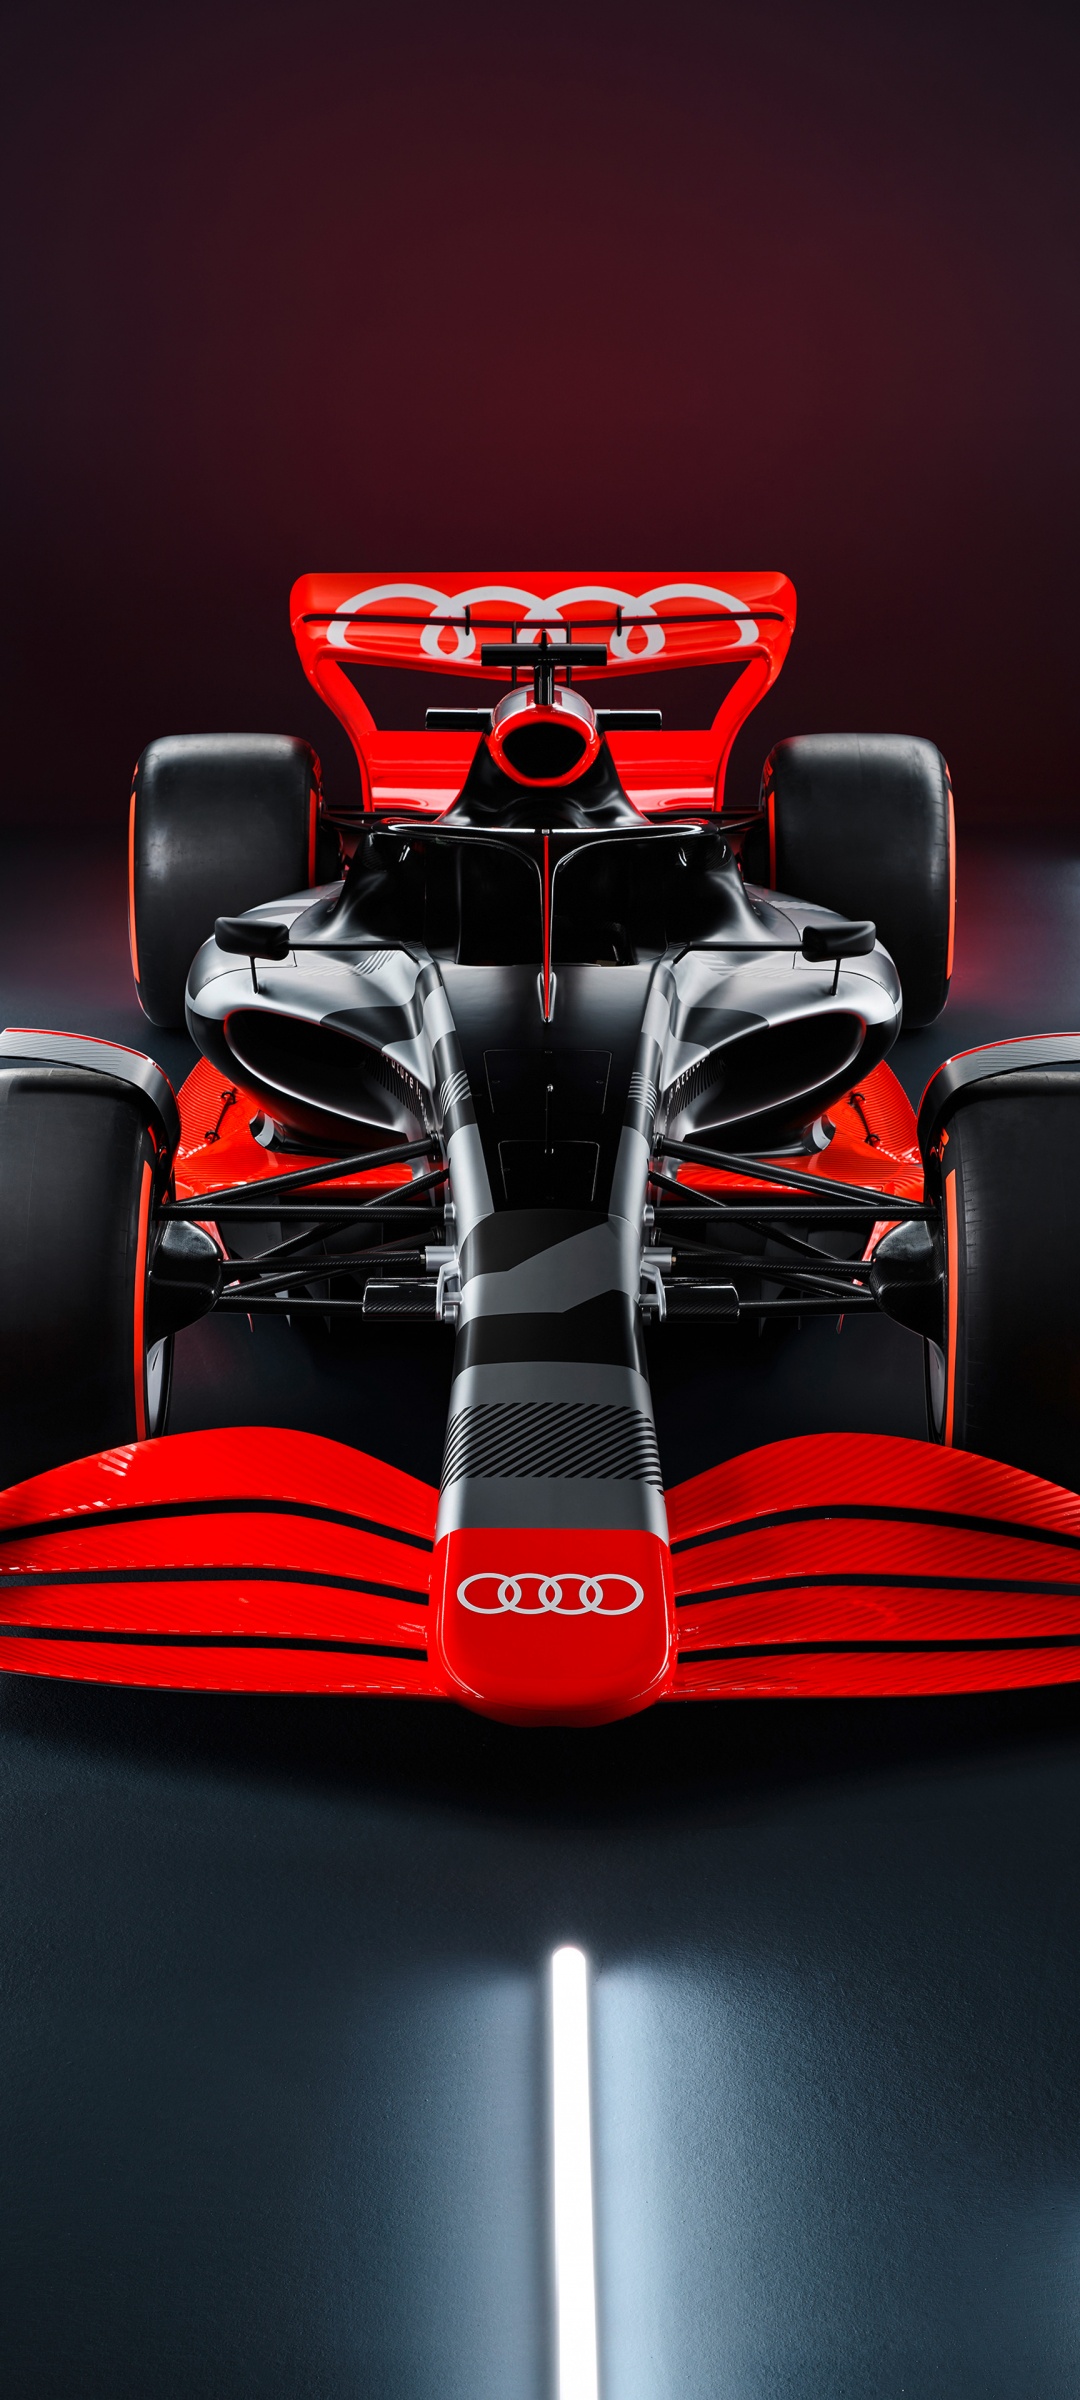 4K F1 Cars Wallpapers [20+]